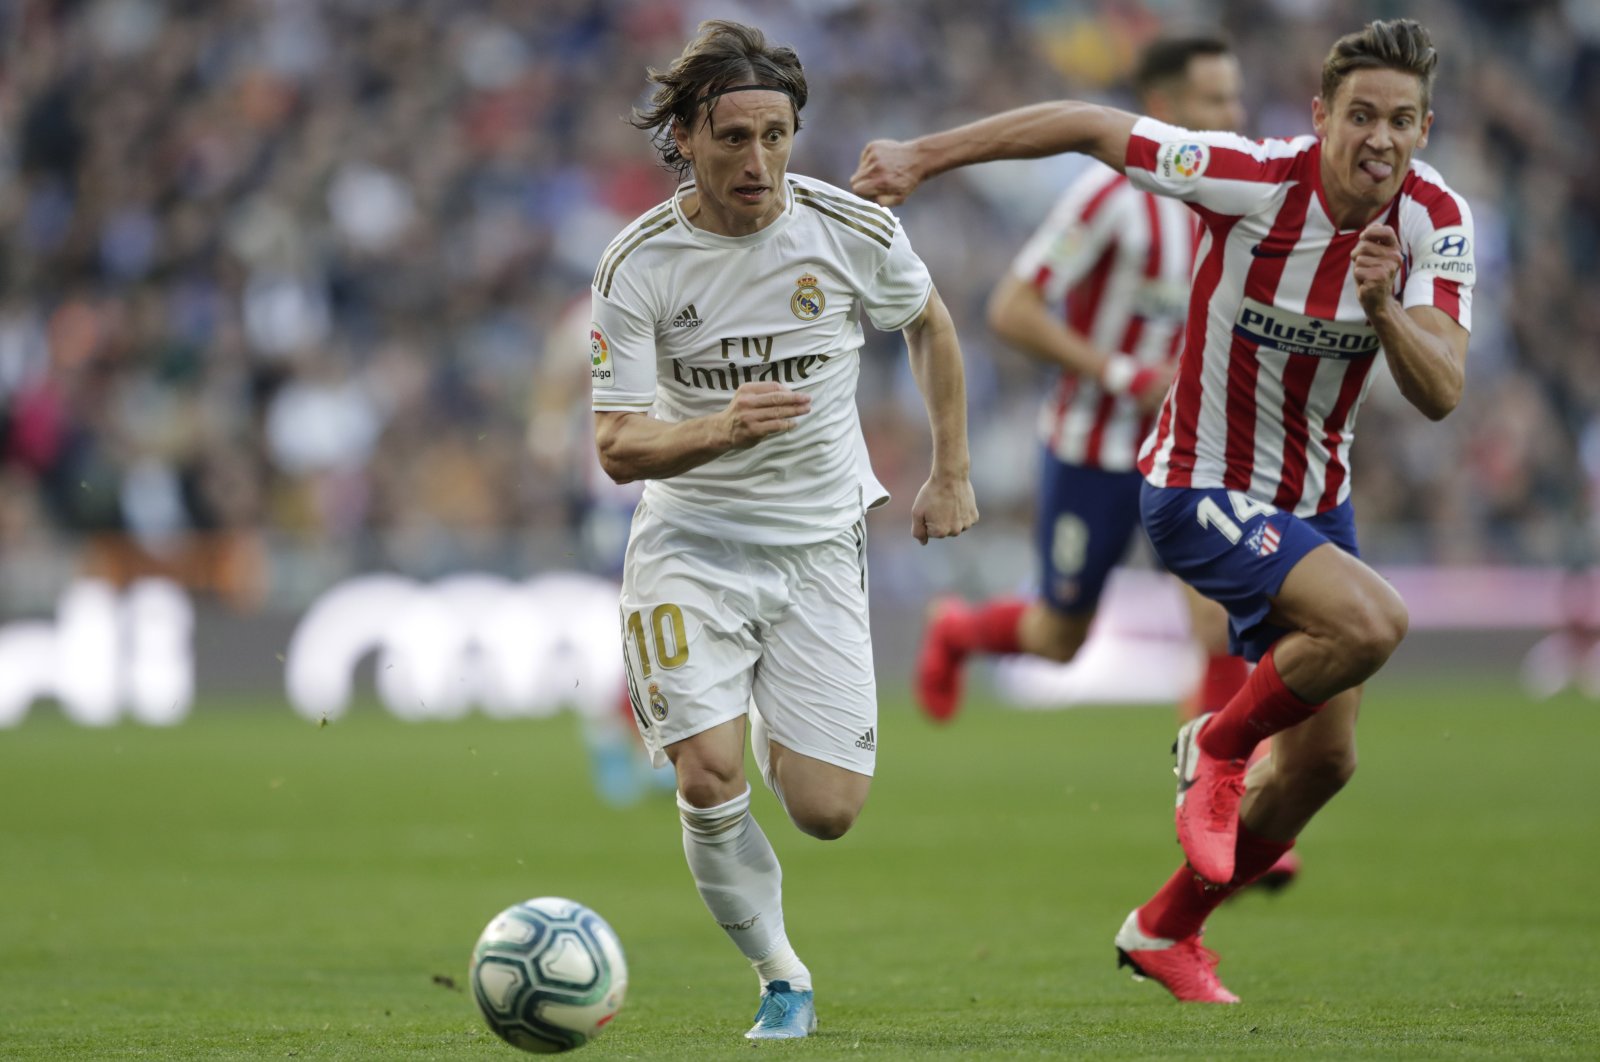 Real Madrid's Luka Modric (L) and Atletico Madrid's Marcos Llorente in action during a La Liga match at the Santiago Bernabeu Stadium in Madrid, Spain, Feb. 1, 2020. (AP Photo)